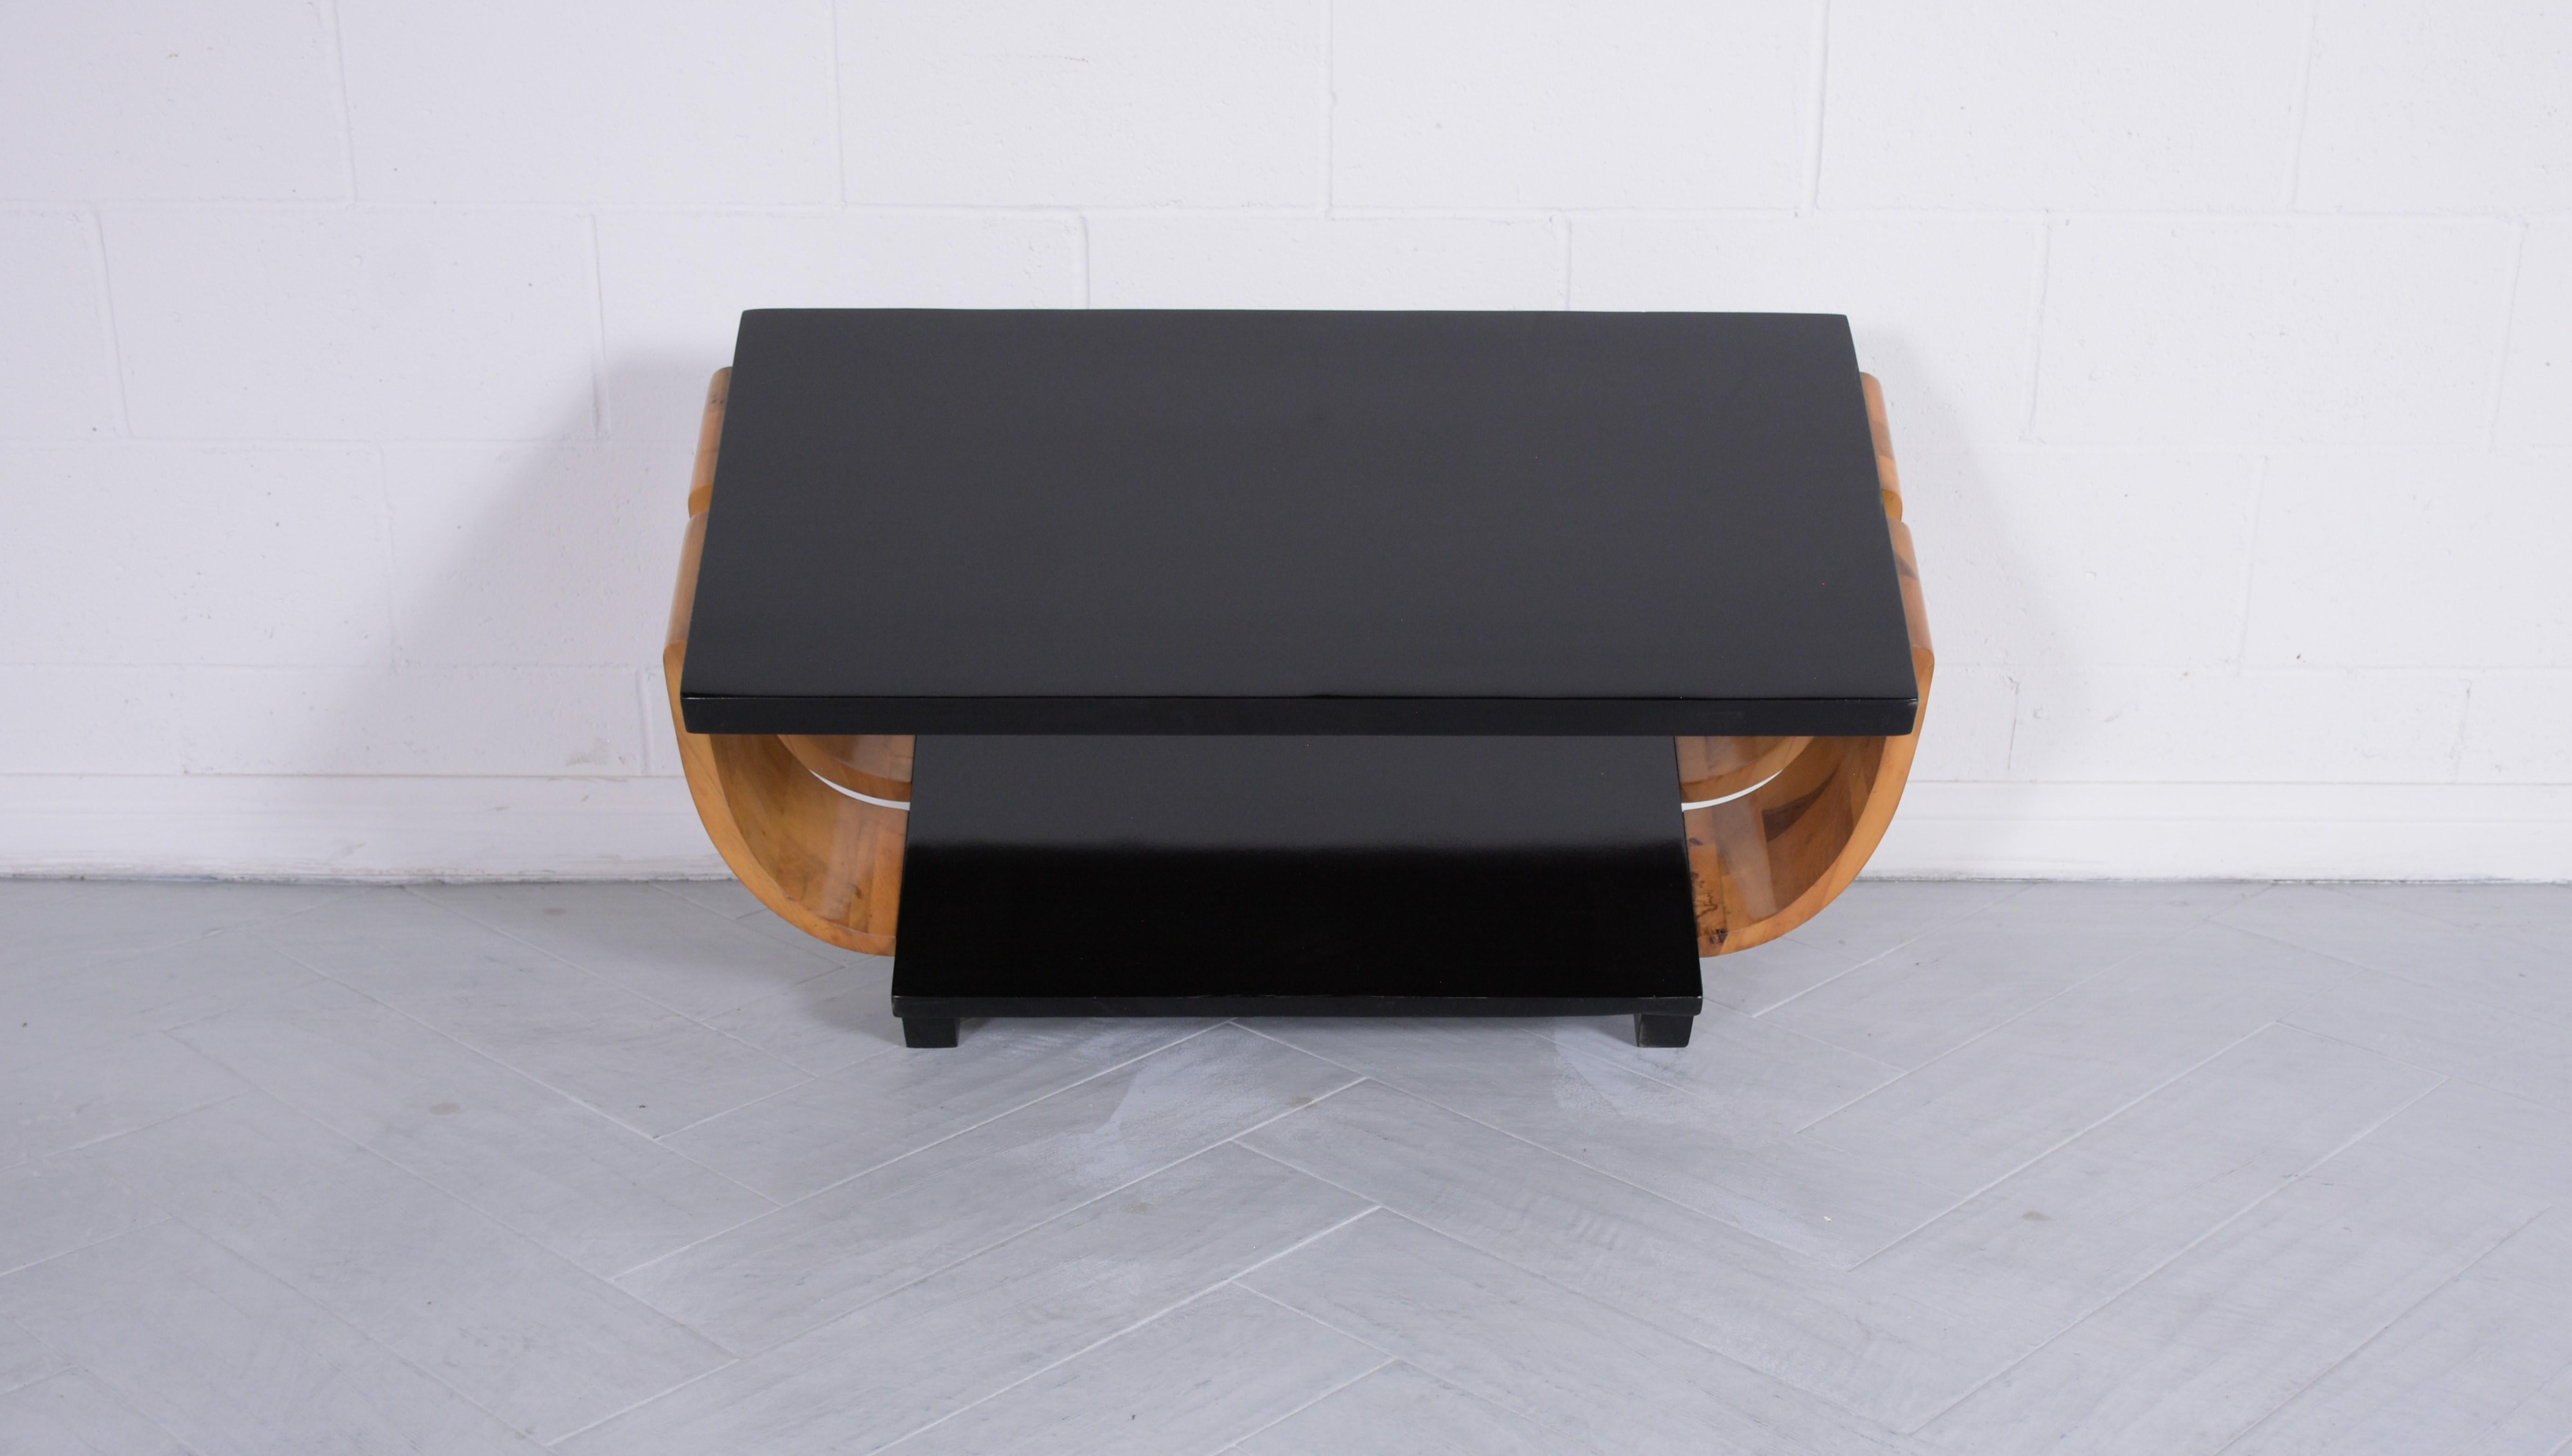 Introducing our exceptional Vintage Mid-Century Modern Coffee Table, beautifully restored and refinished by our professional craftsmen team. Crafted from durable wood, this table displays a striking ebonized and natural color combination, enhanced